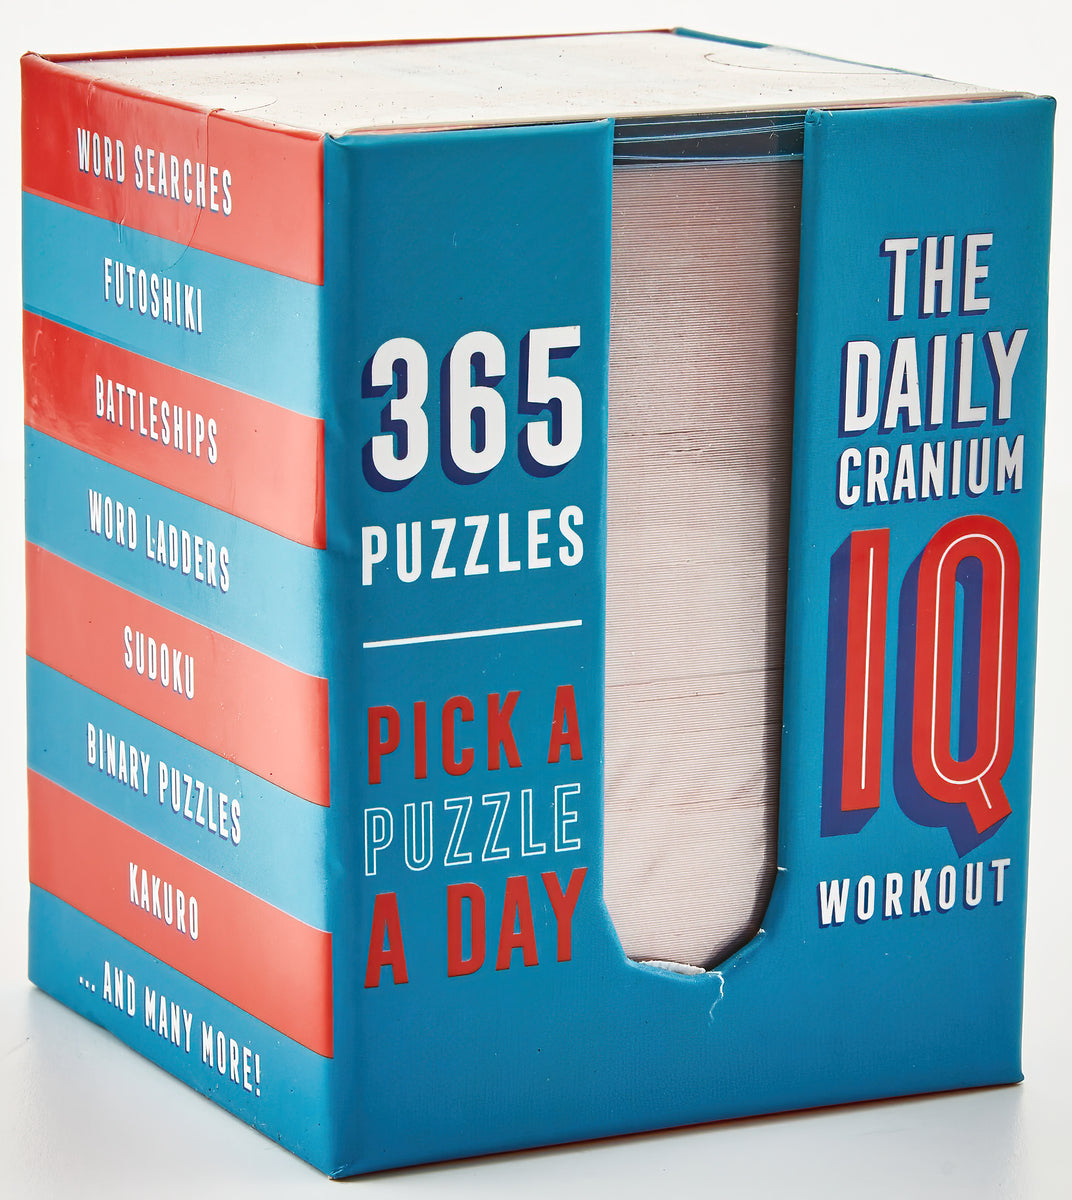 The Daily Cranium IQ Workout 365 'Pick A Puzzle A Day' Sudoku